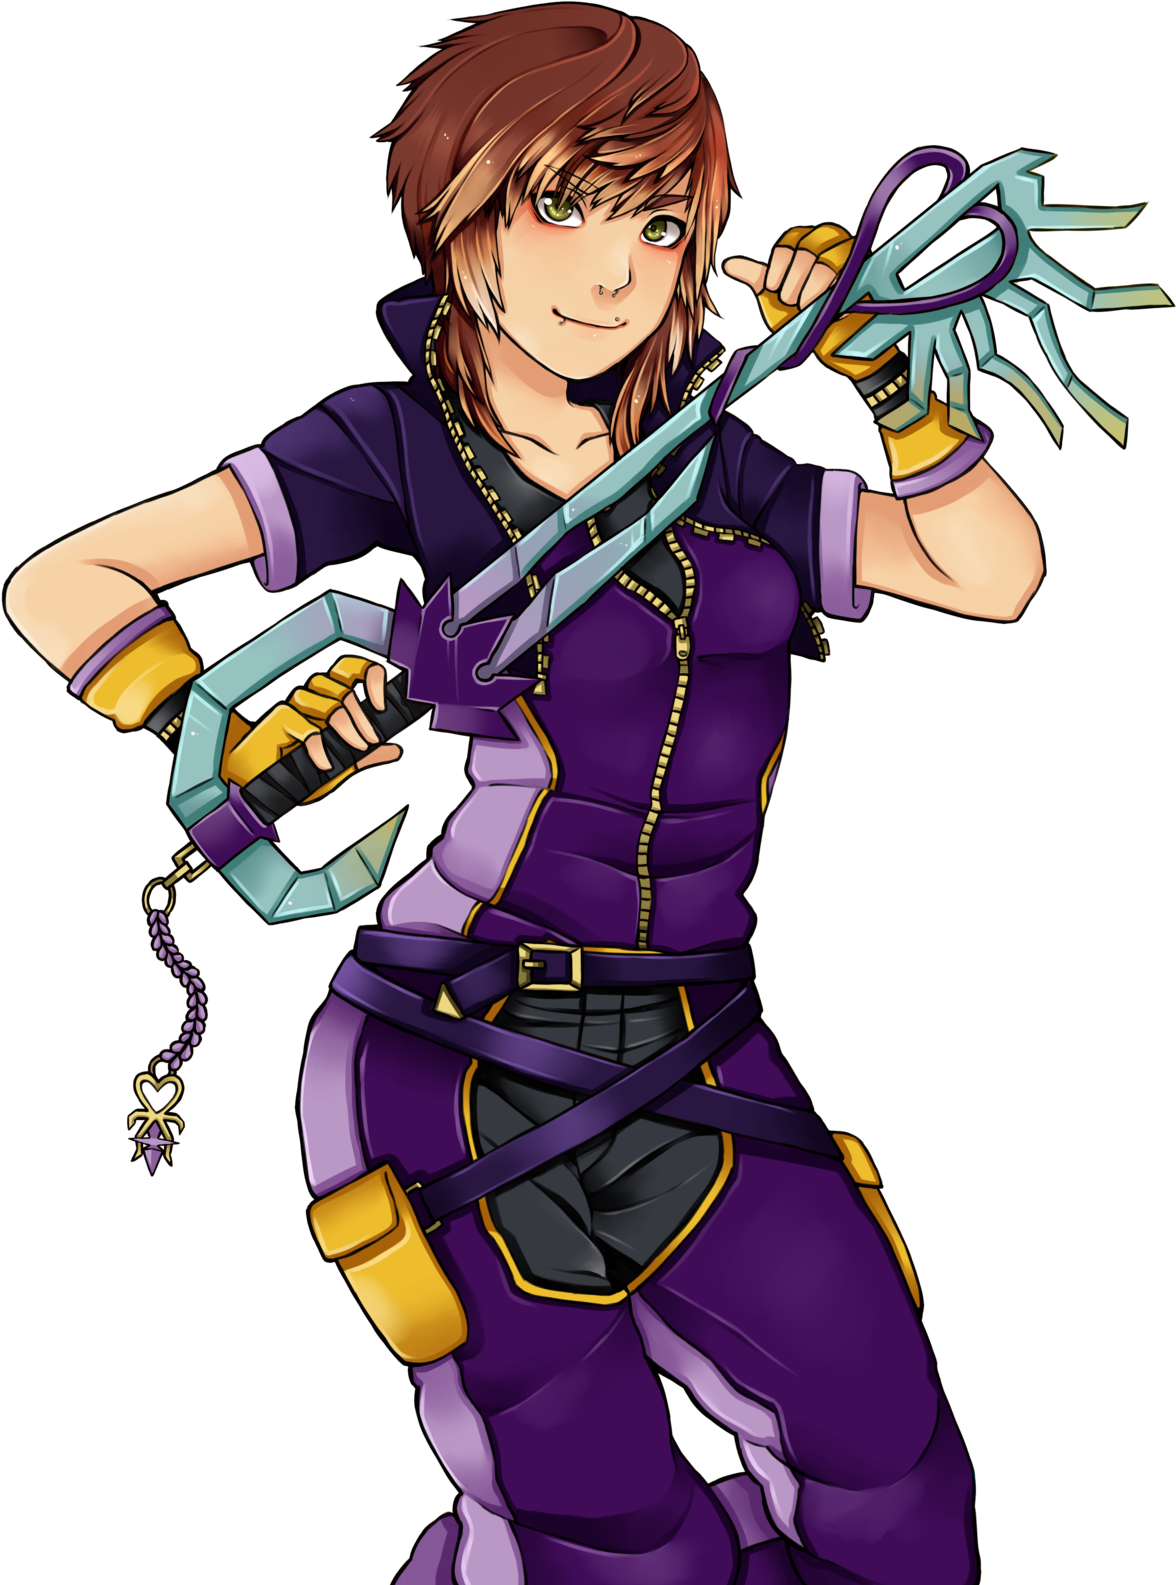 Kingdom Hearts Style Commission For Xena By Kimbolie12 - Kingdom Hearts Oc Commissions (1280x1810)